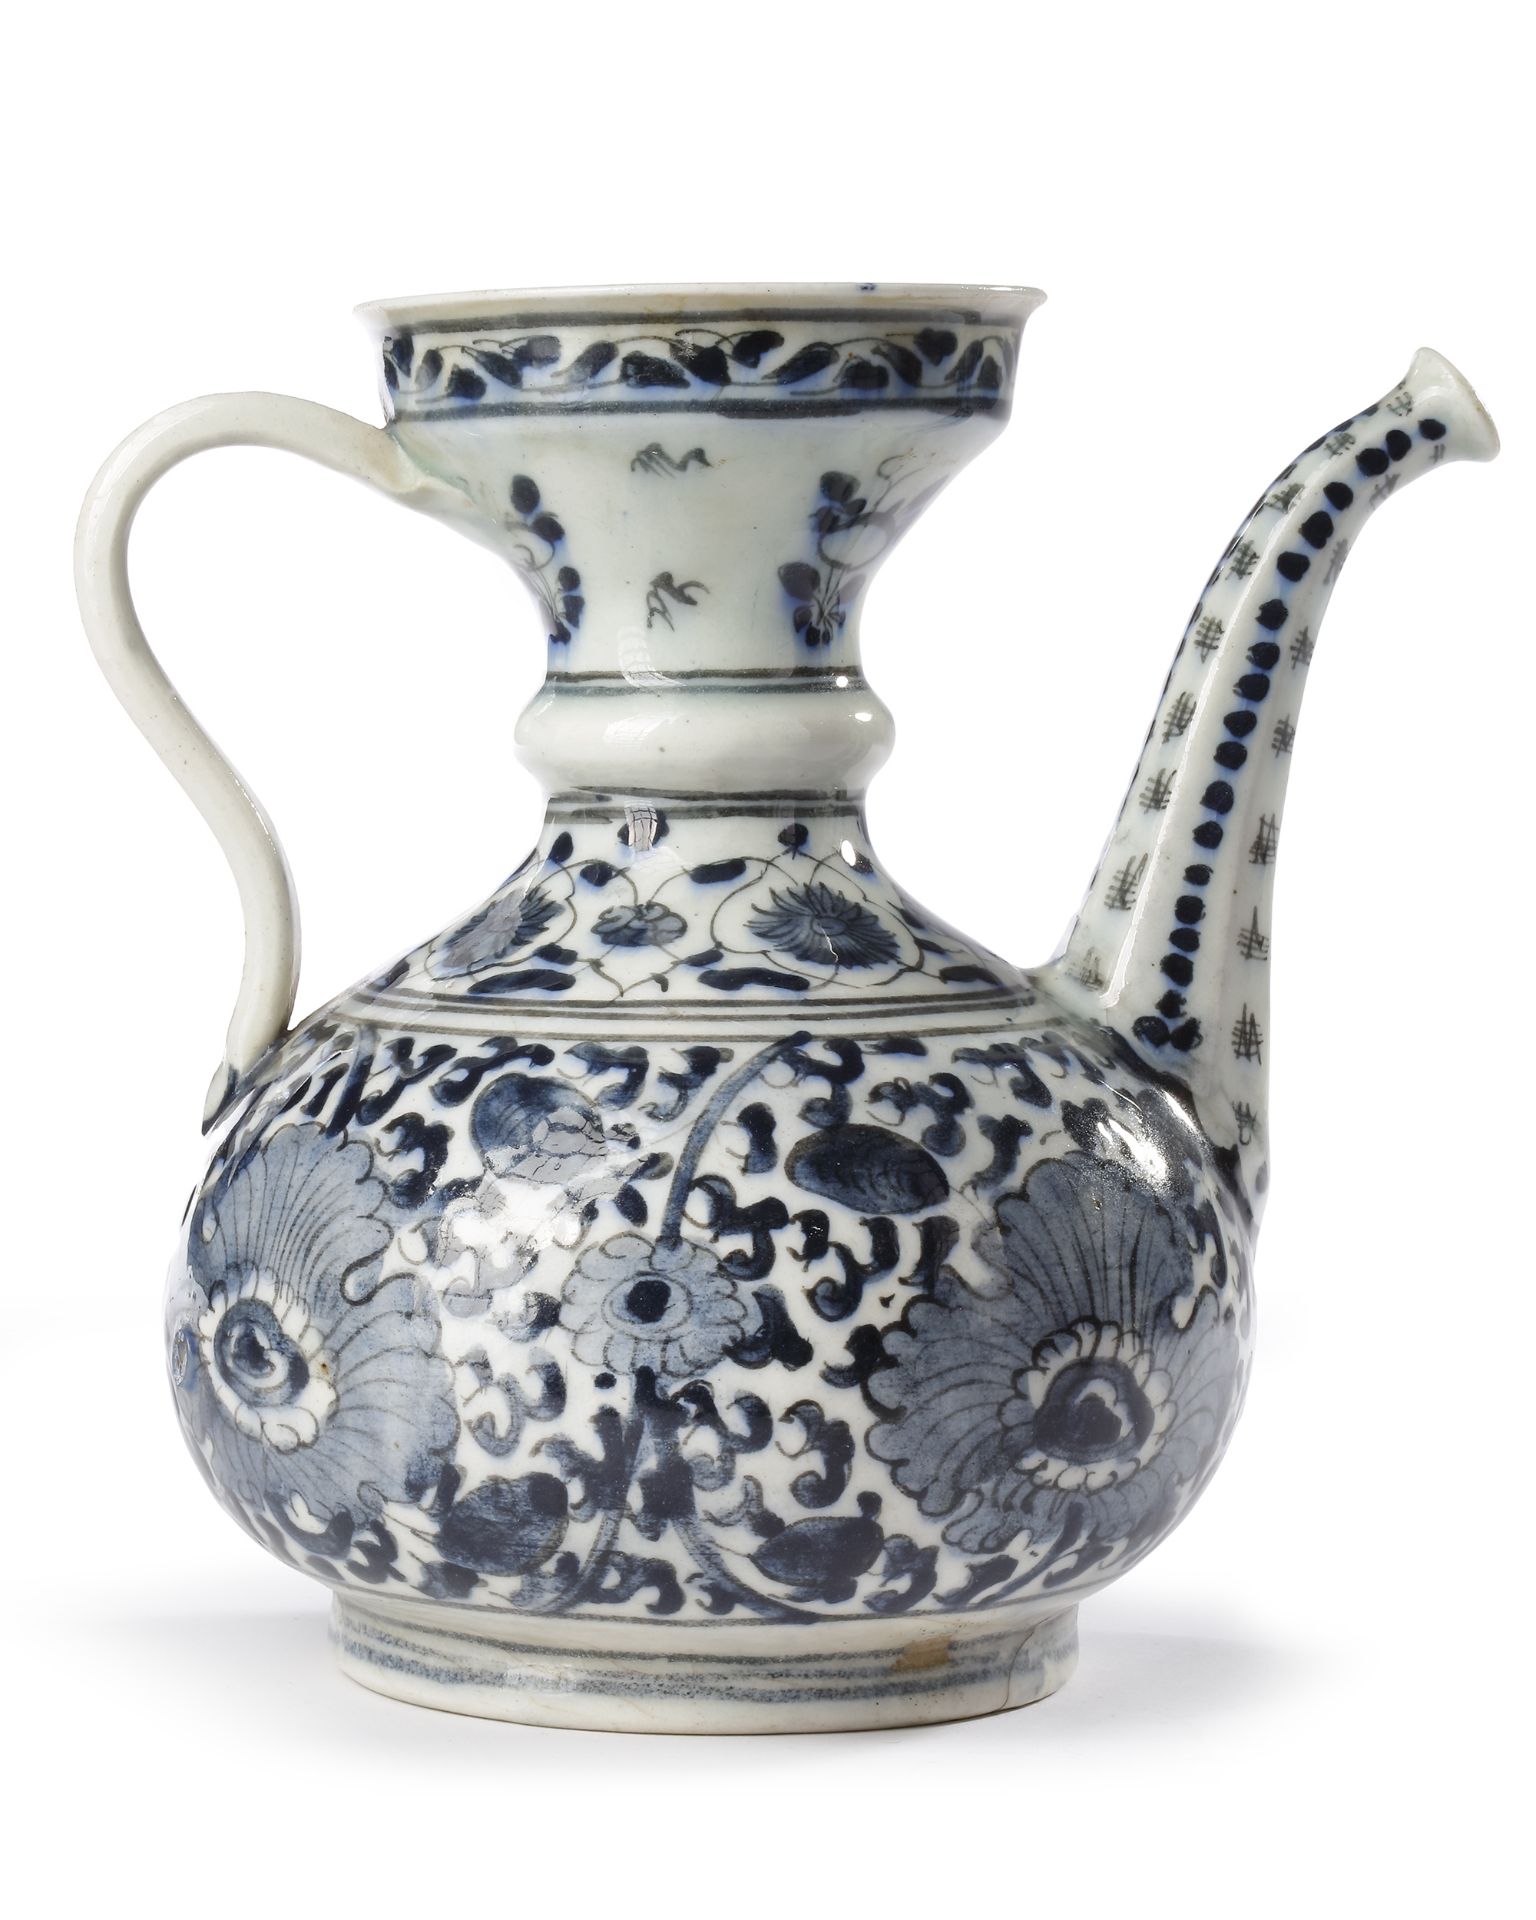 A SAFAVID BLUE, BLACK AND WHITE EWER, PERSIA, 18TH CENTURY